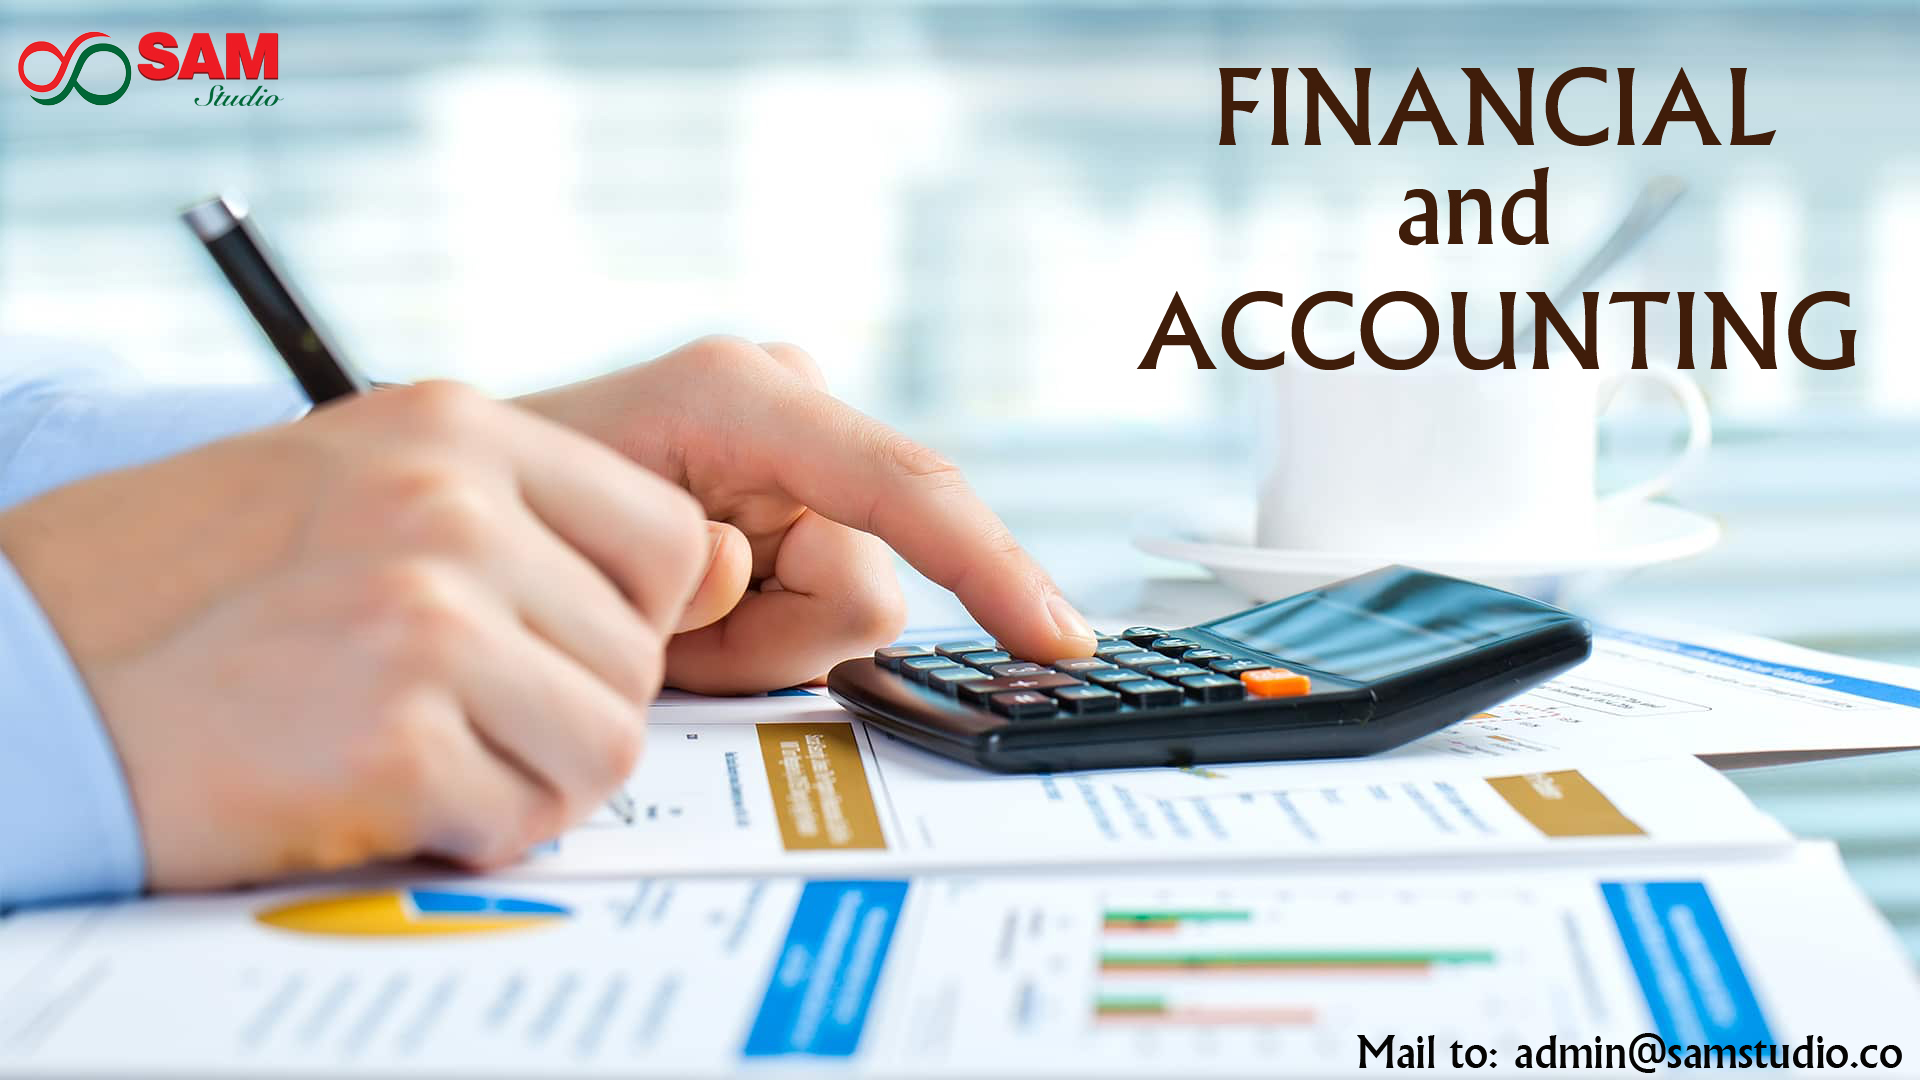 Outsource financial and accounting services